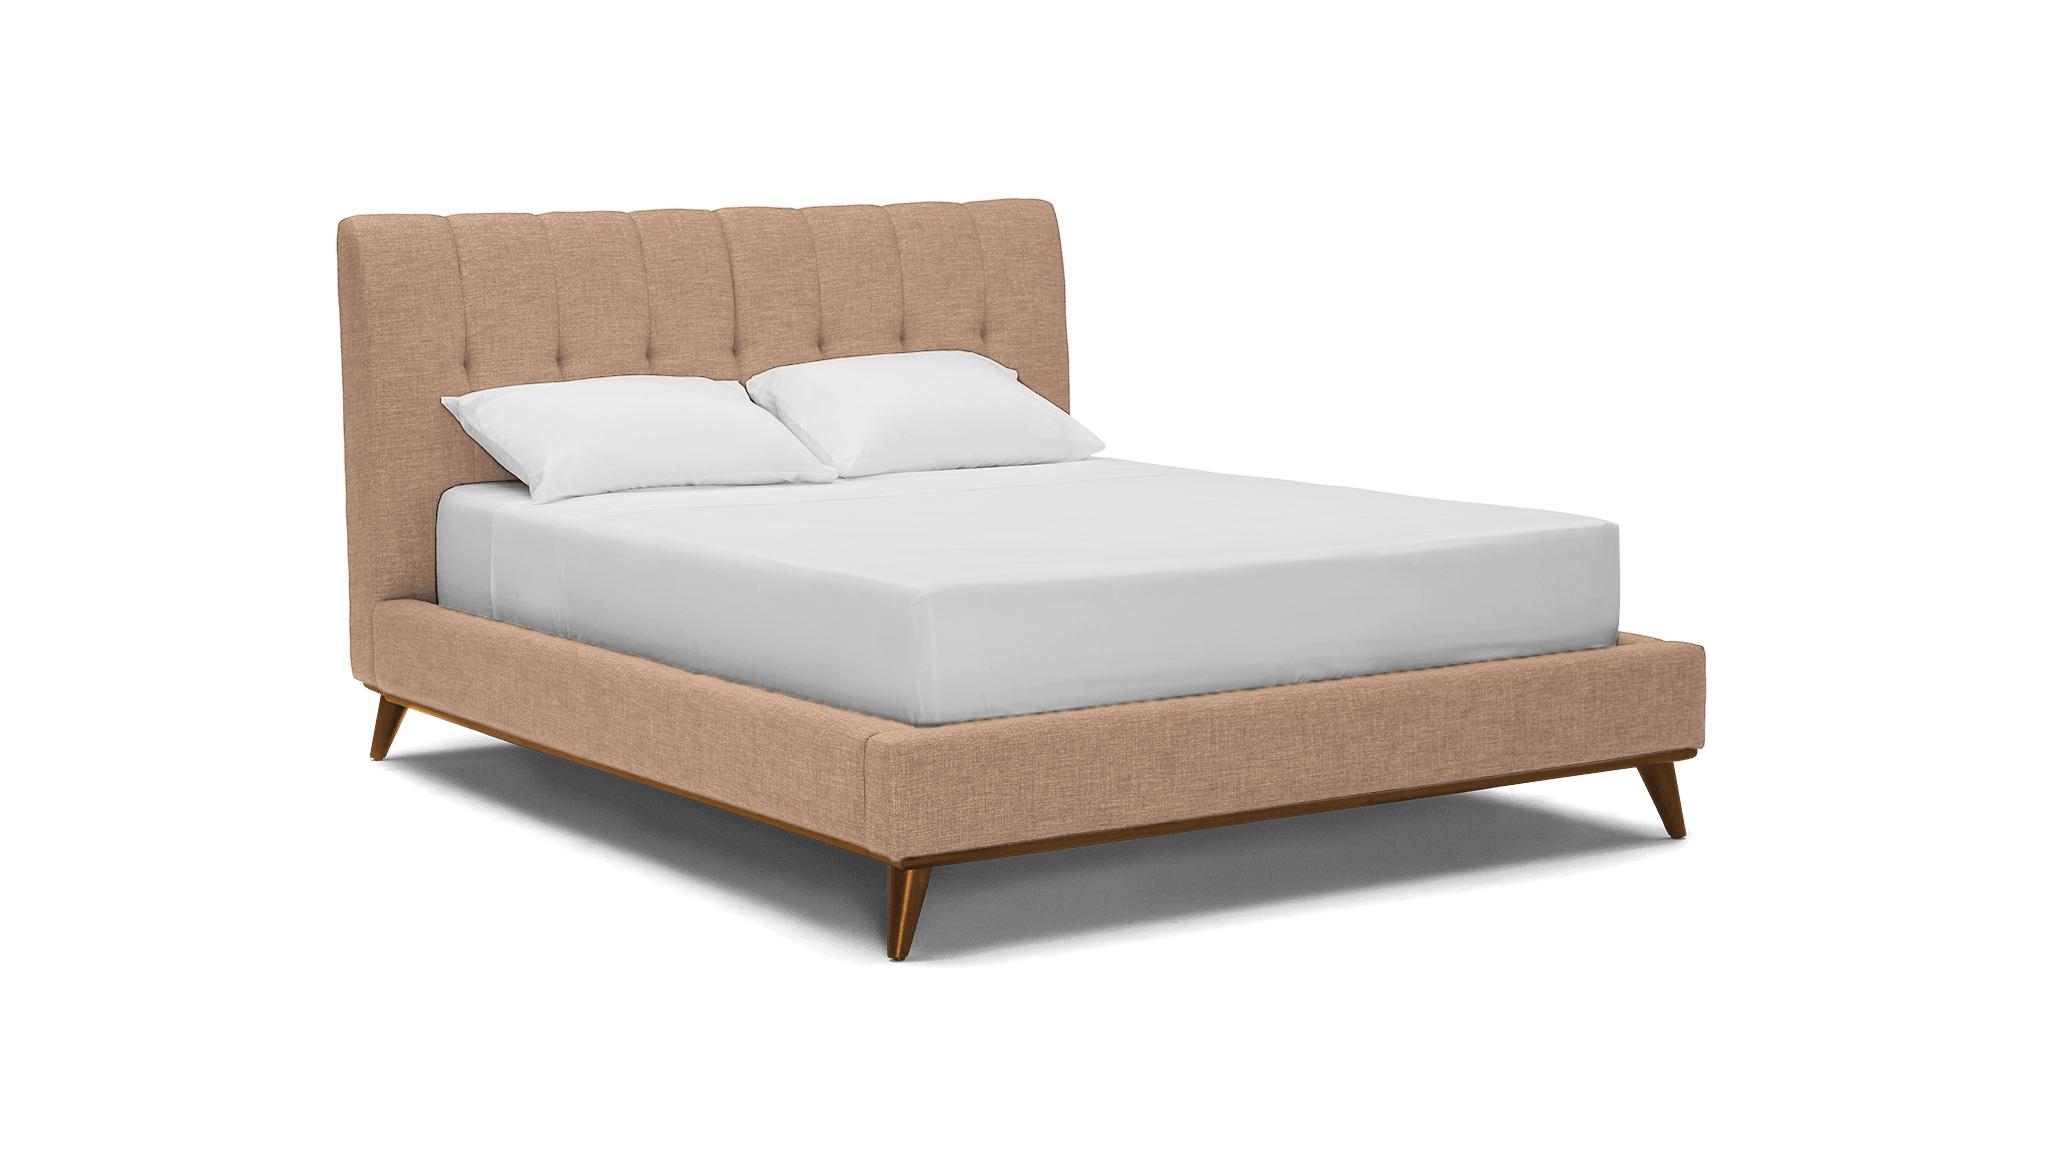 Pink Hughes Mid Century Modern Bed - Royale Blush - Mocha - Queen - Image 1